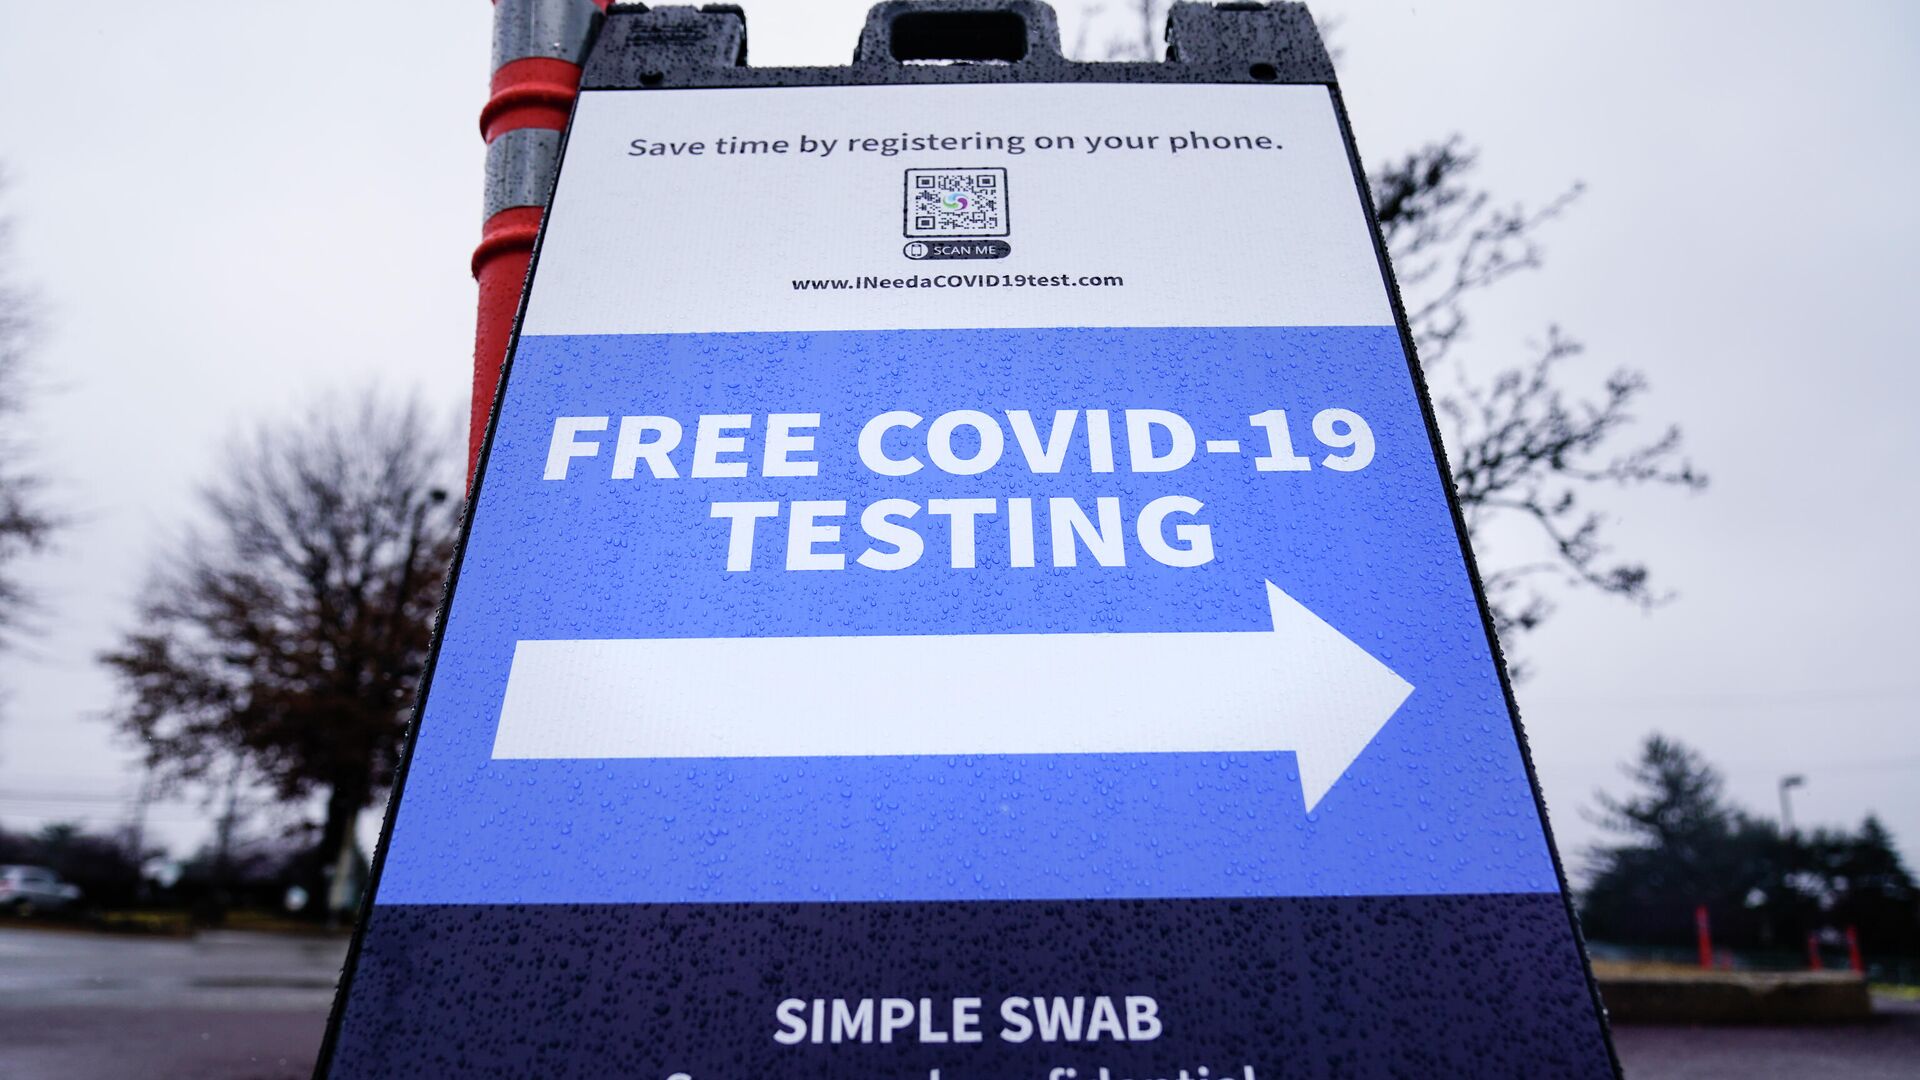 Signs direct motorist to a free drive-thru COVID-19 testing site in the parking lot of the Mercy Fitzgerald Hospital in Darby, Pa., Thursday, Jan. 20, 2022. - Sputnik International, 1920, 22.01.2022